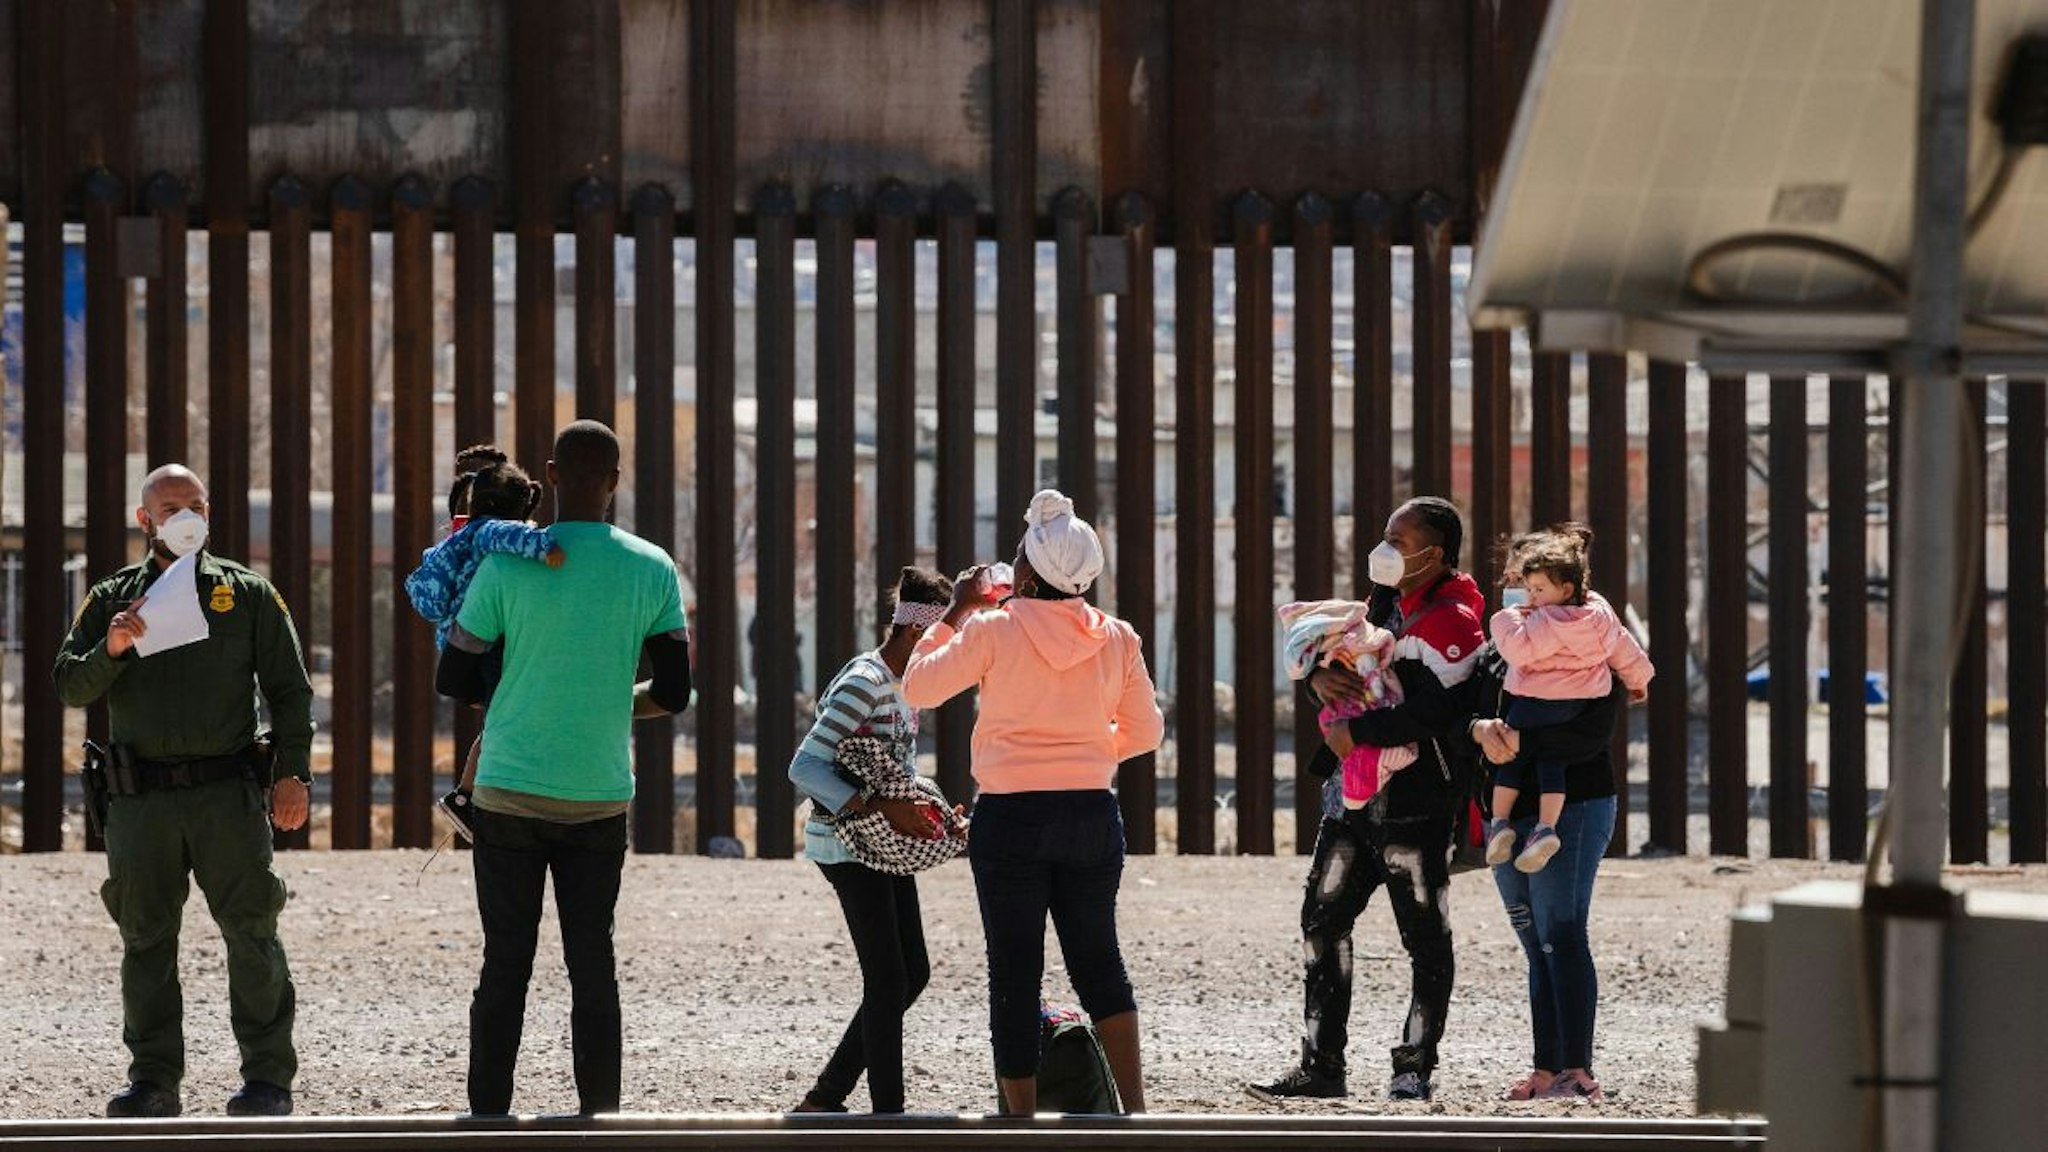 Border Patrol agents apprehend a group of migrants near downtown El Paso, Texas following the congressional border delegation visit on March 15, 2021.